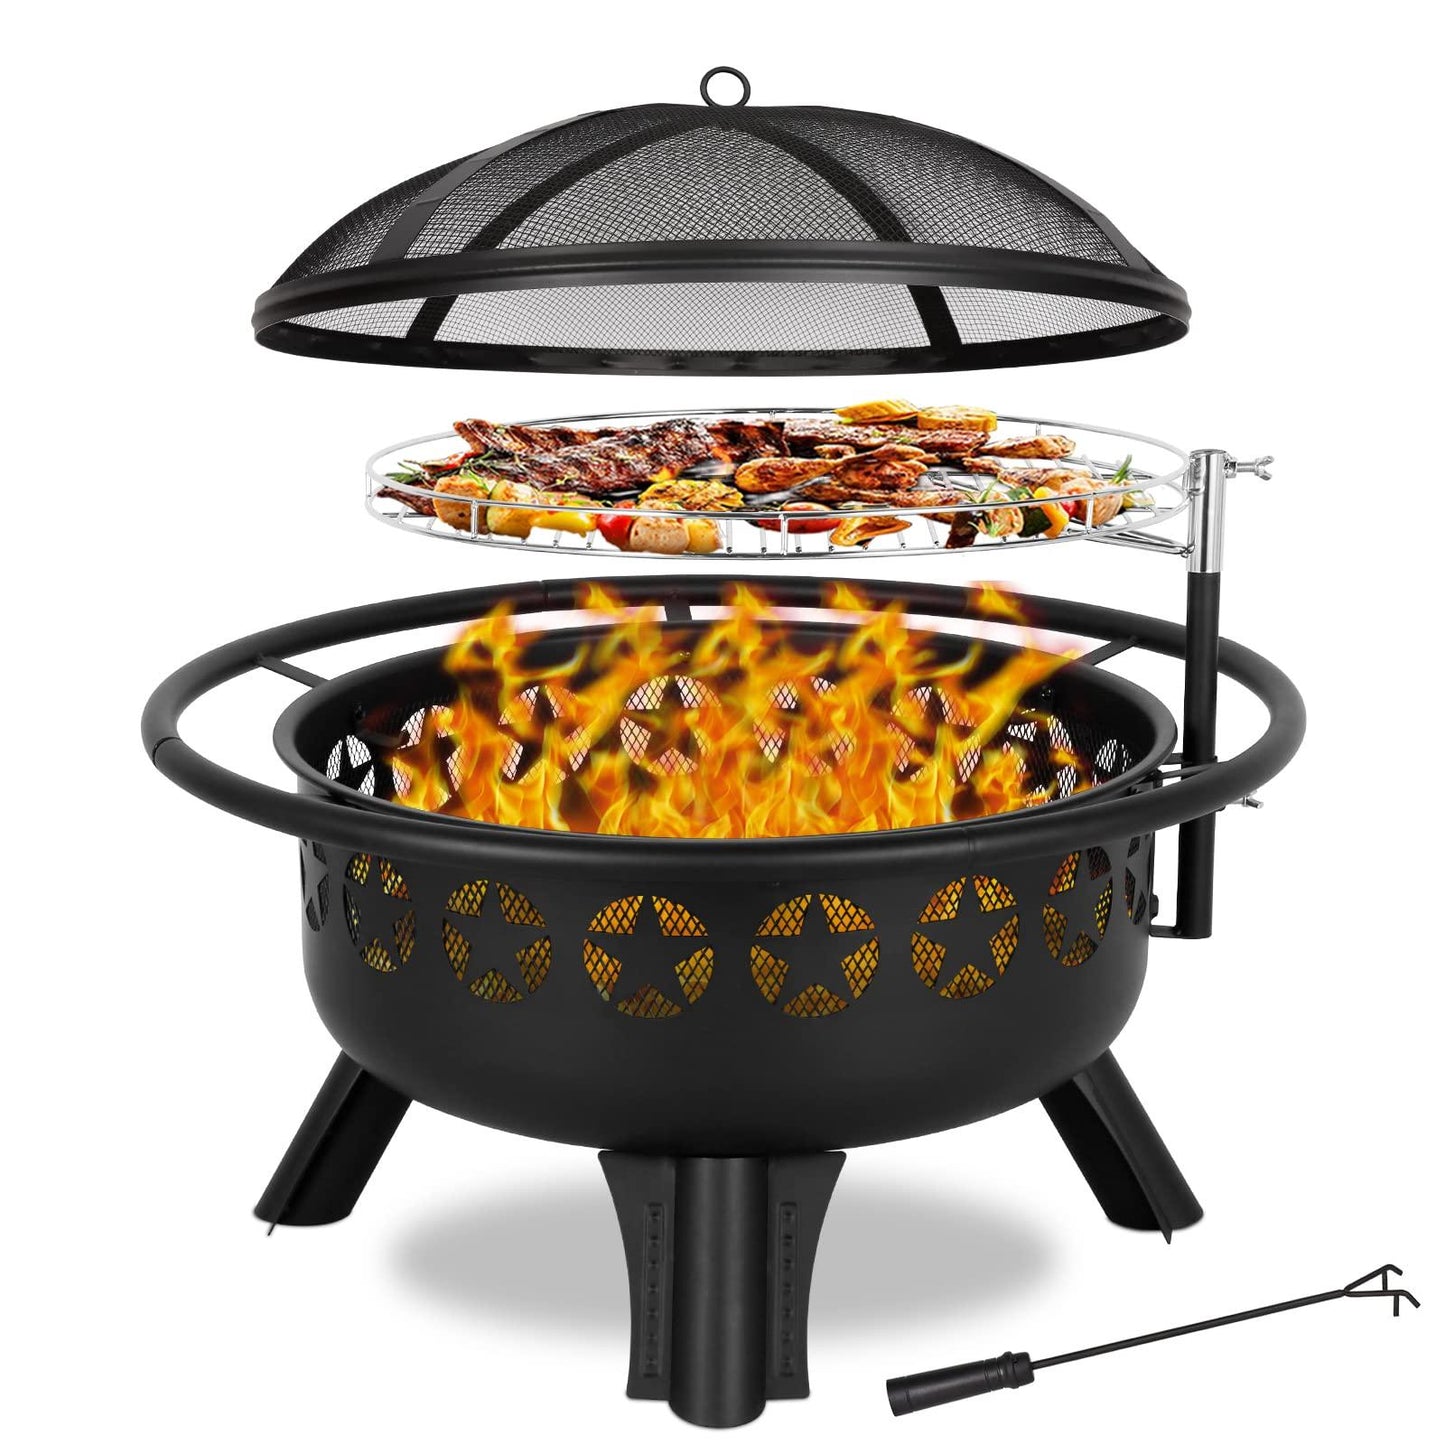 Hykolity 2 in 1 Fire Pit with Grill, Large 31" Wood Burning Fire Pit with Swivel Cooking Grate Outdoor Firepit for Backyard Bonfire Patio Outside Picnic BBQ, Spark Cover, Fire Poker - CookCave